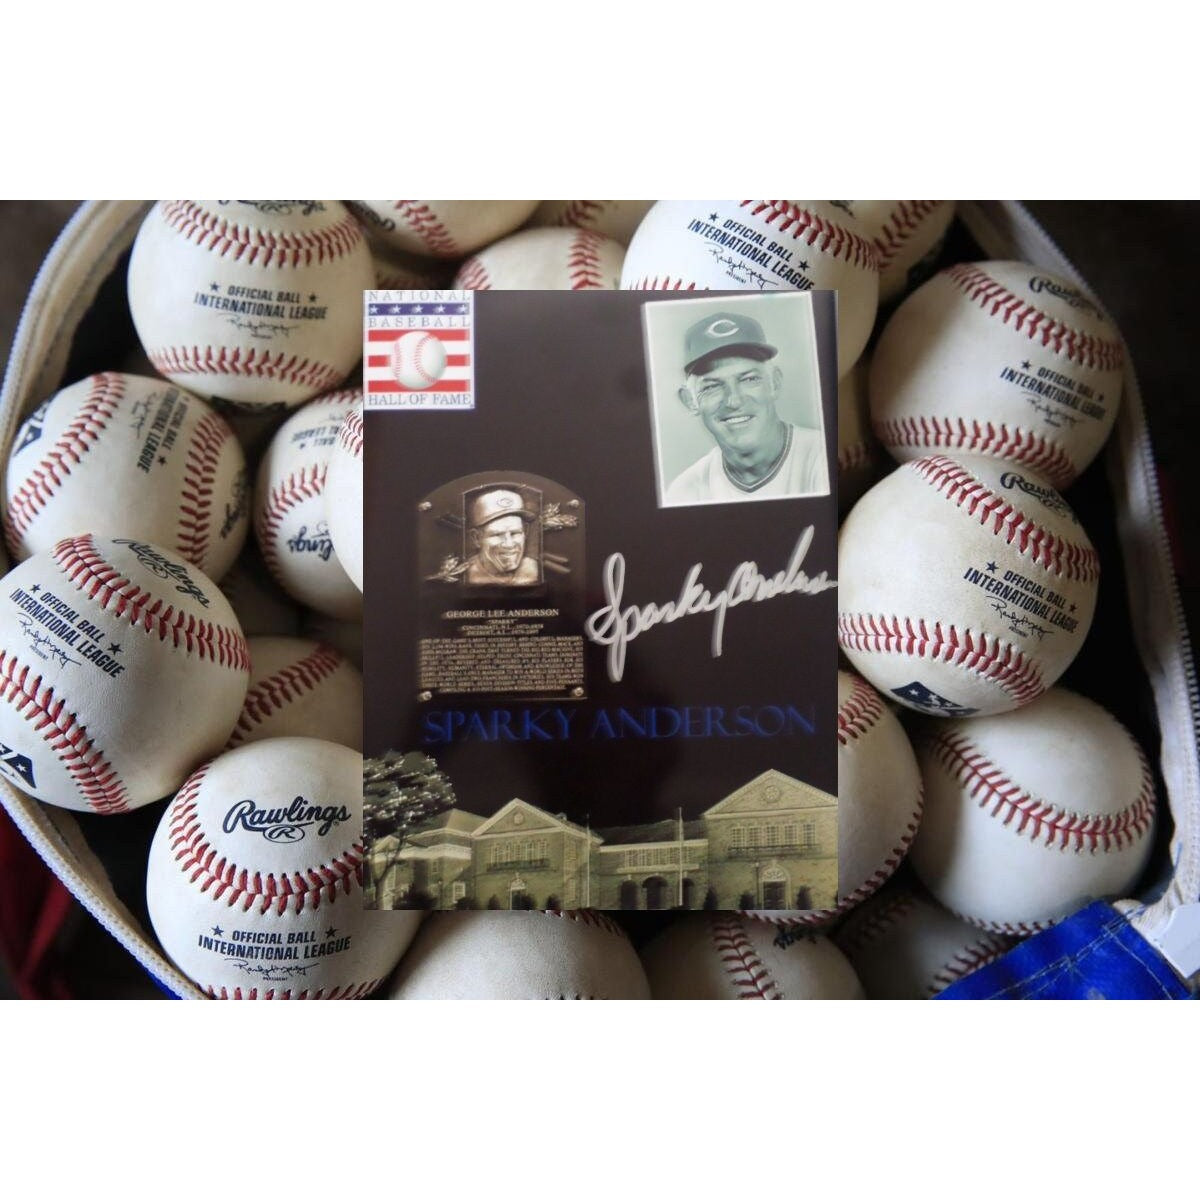 Sparky Anderson 8 x 10 signed photo